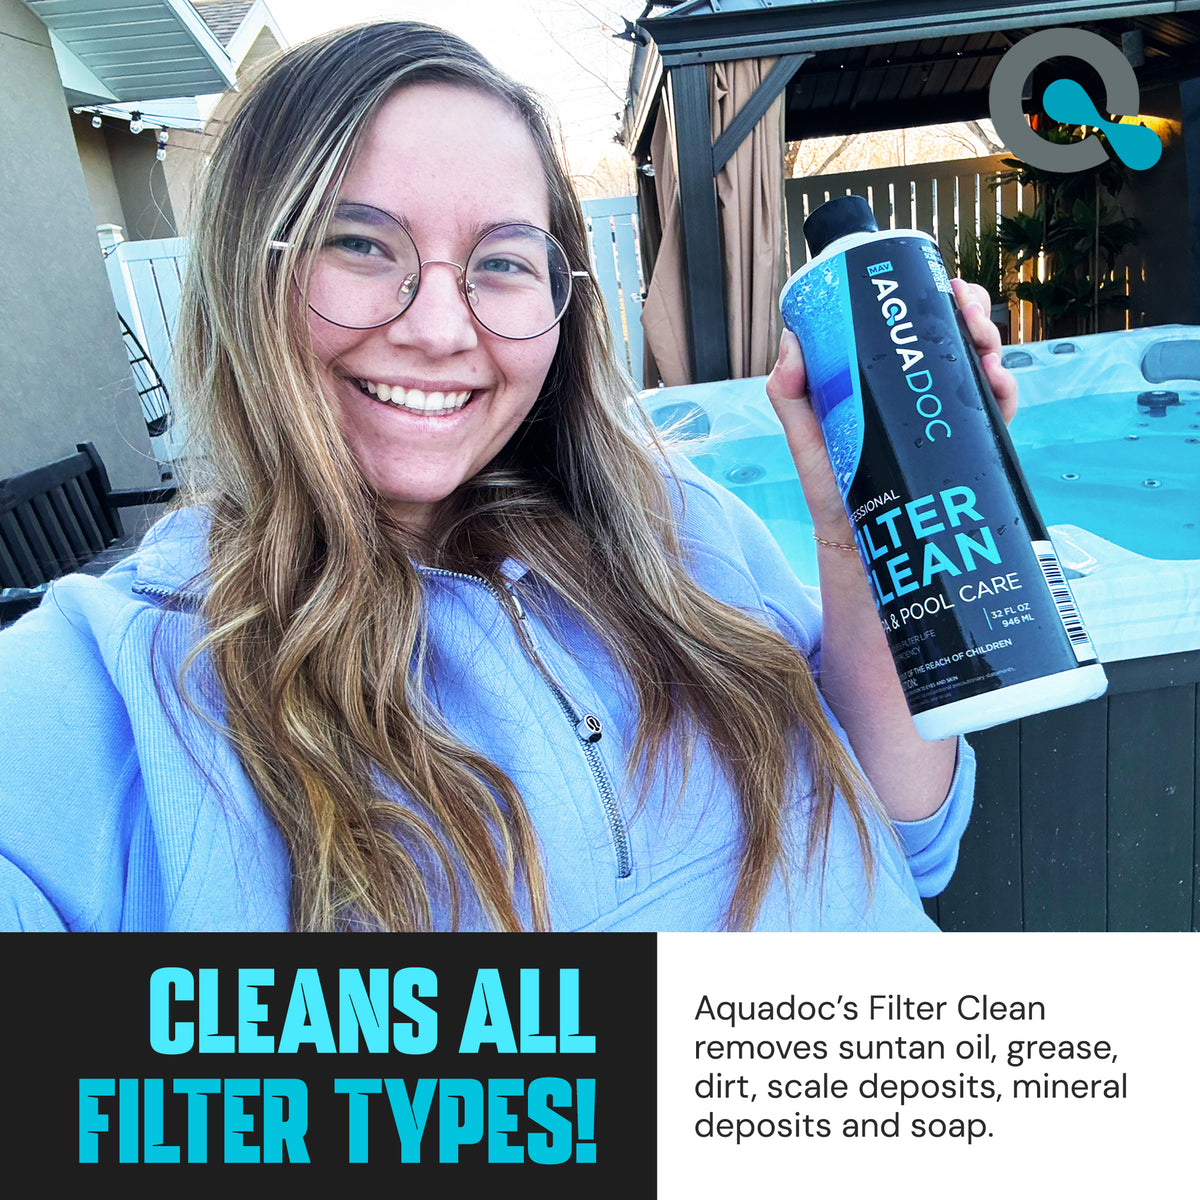 Cleanse All Filter Types with AquaDoc's Liquid Cleaner